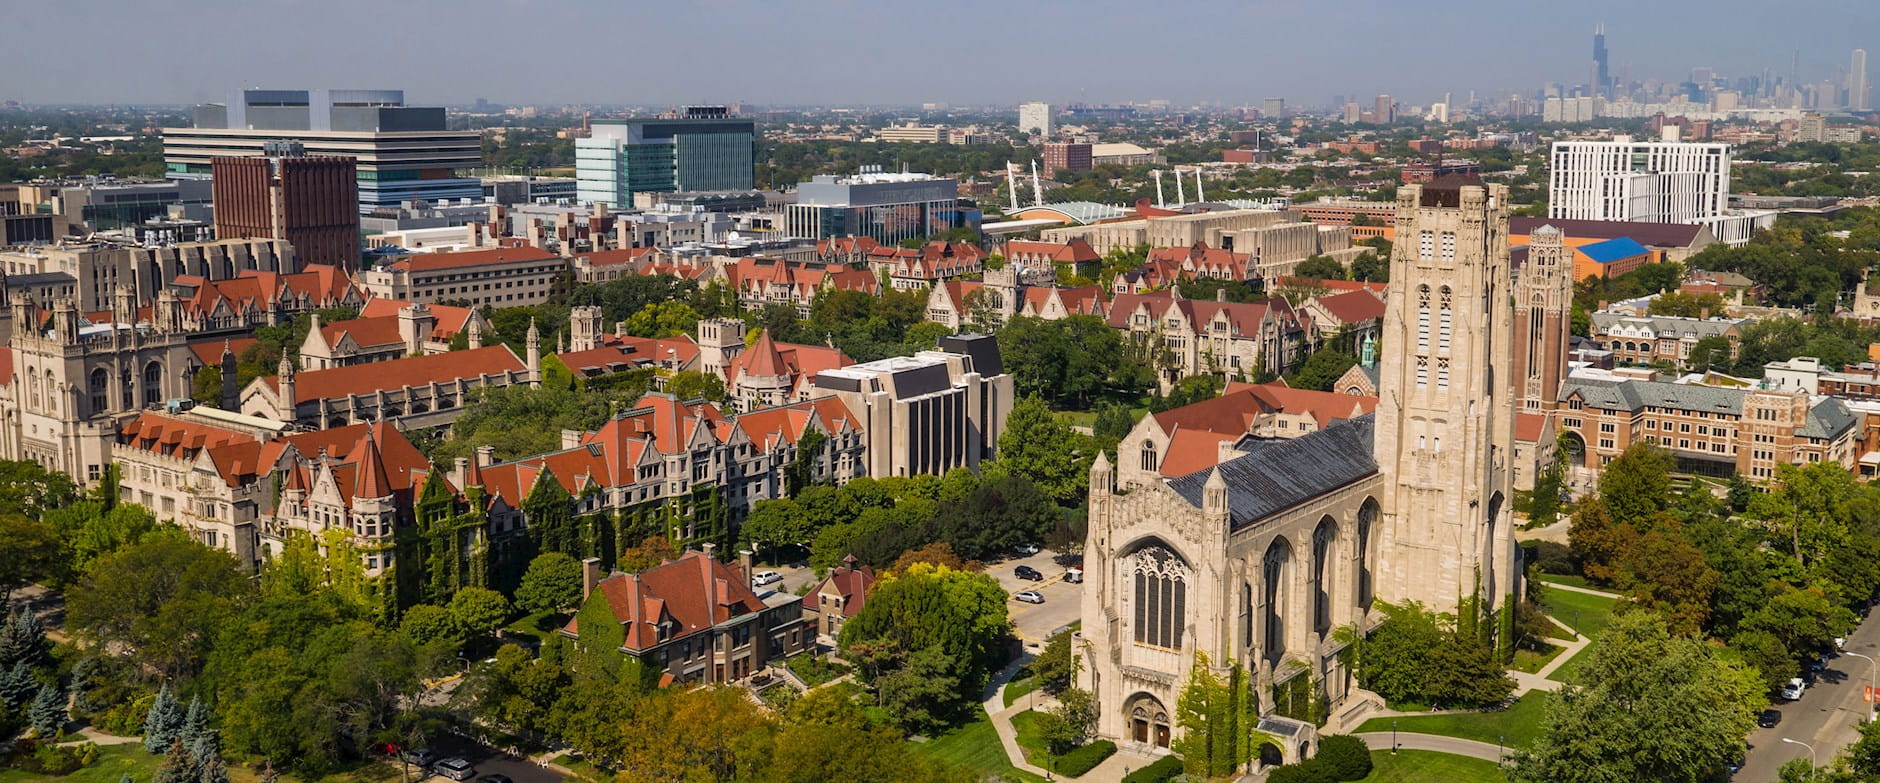 University of Chicago campus overhead view